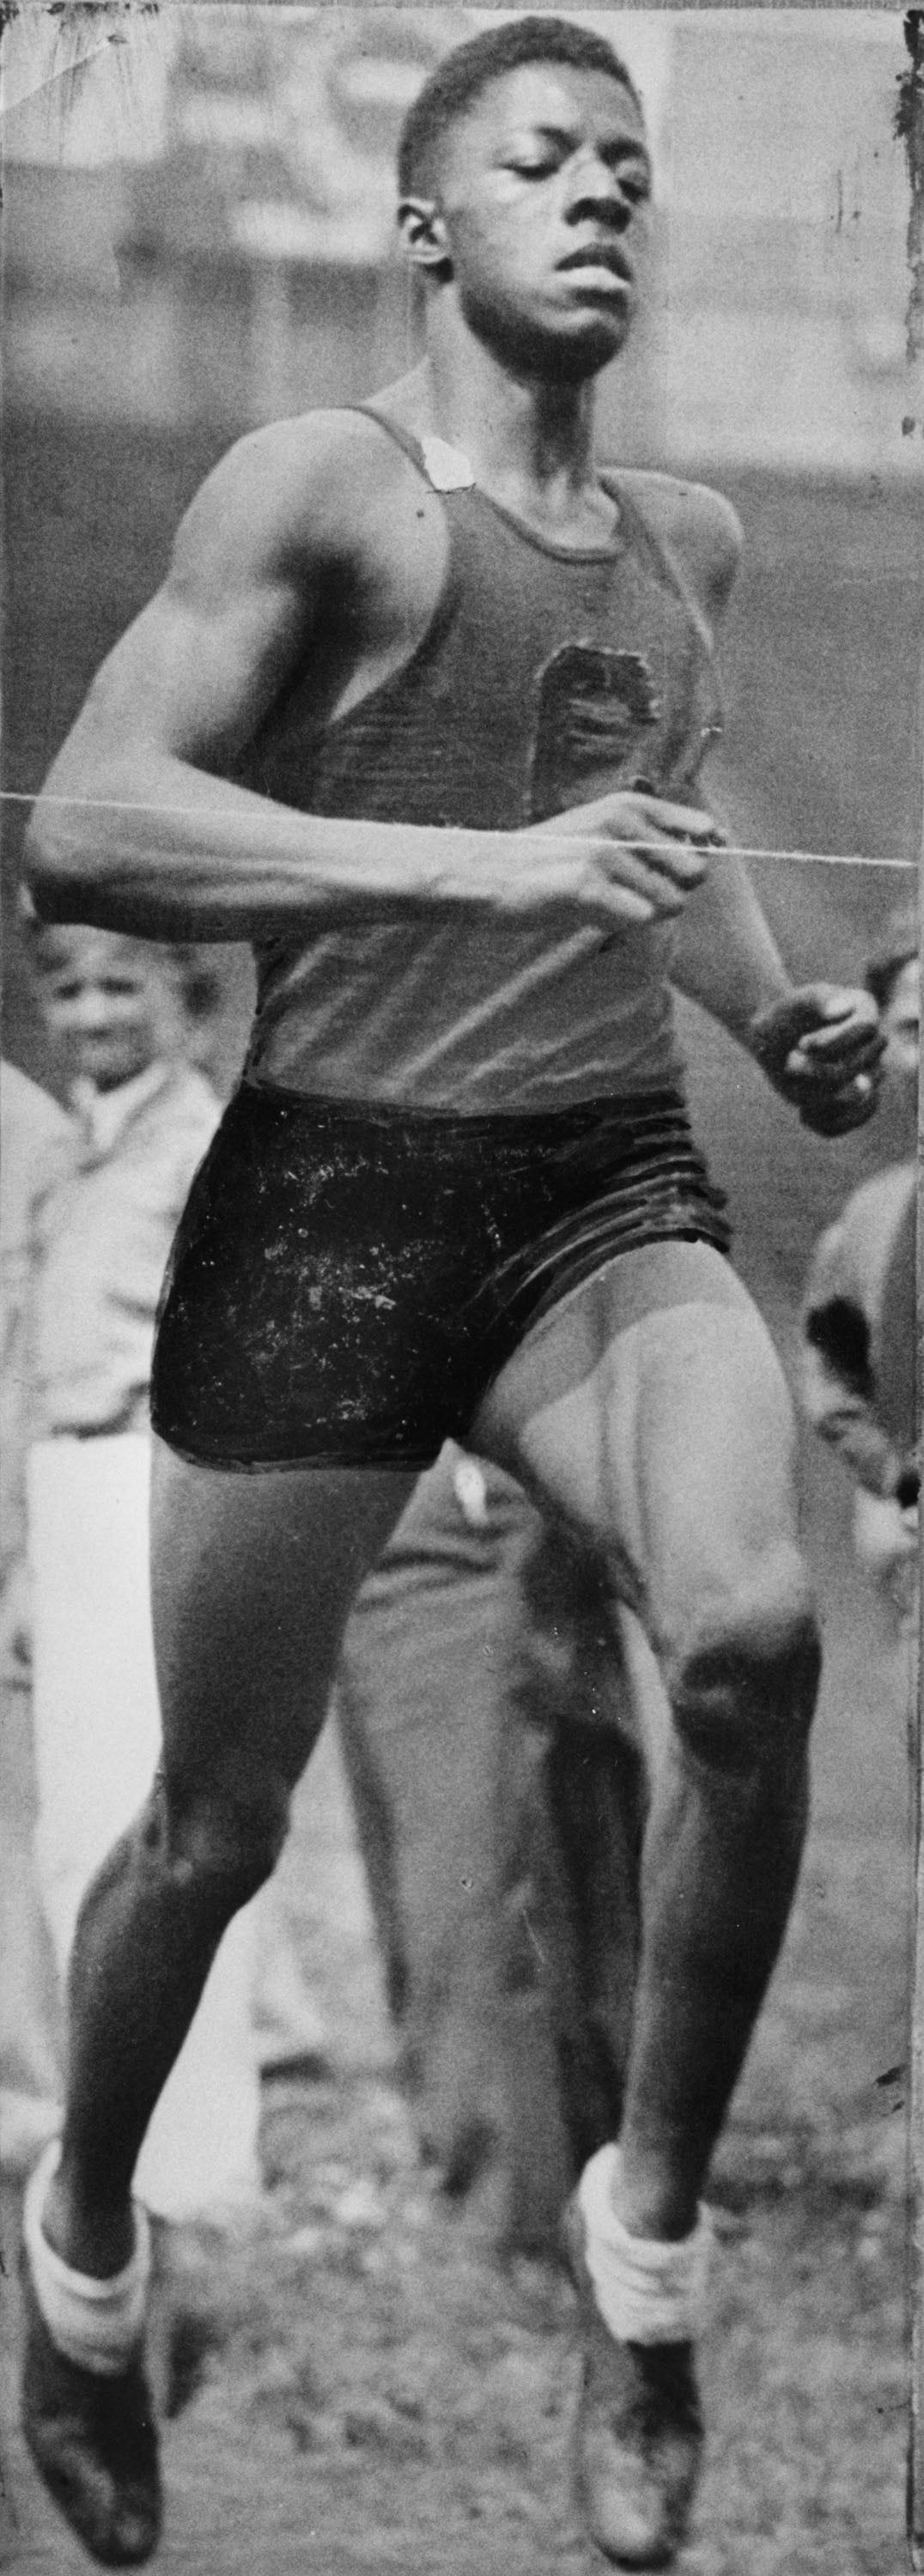 Black and white historical newspaper photo of John Woodruff running in the 800-meter race in the 1936 Olympics in Berlin, Germany